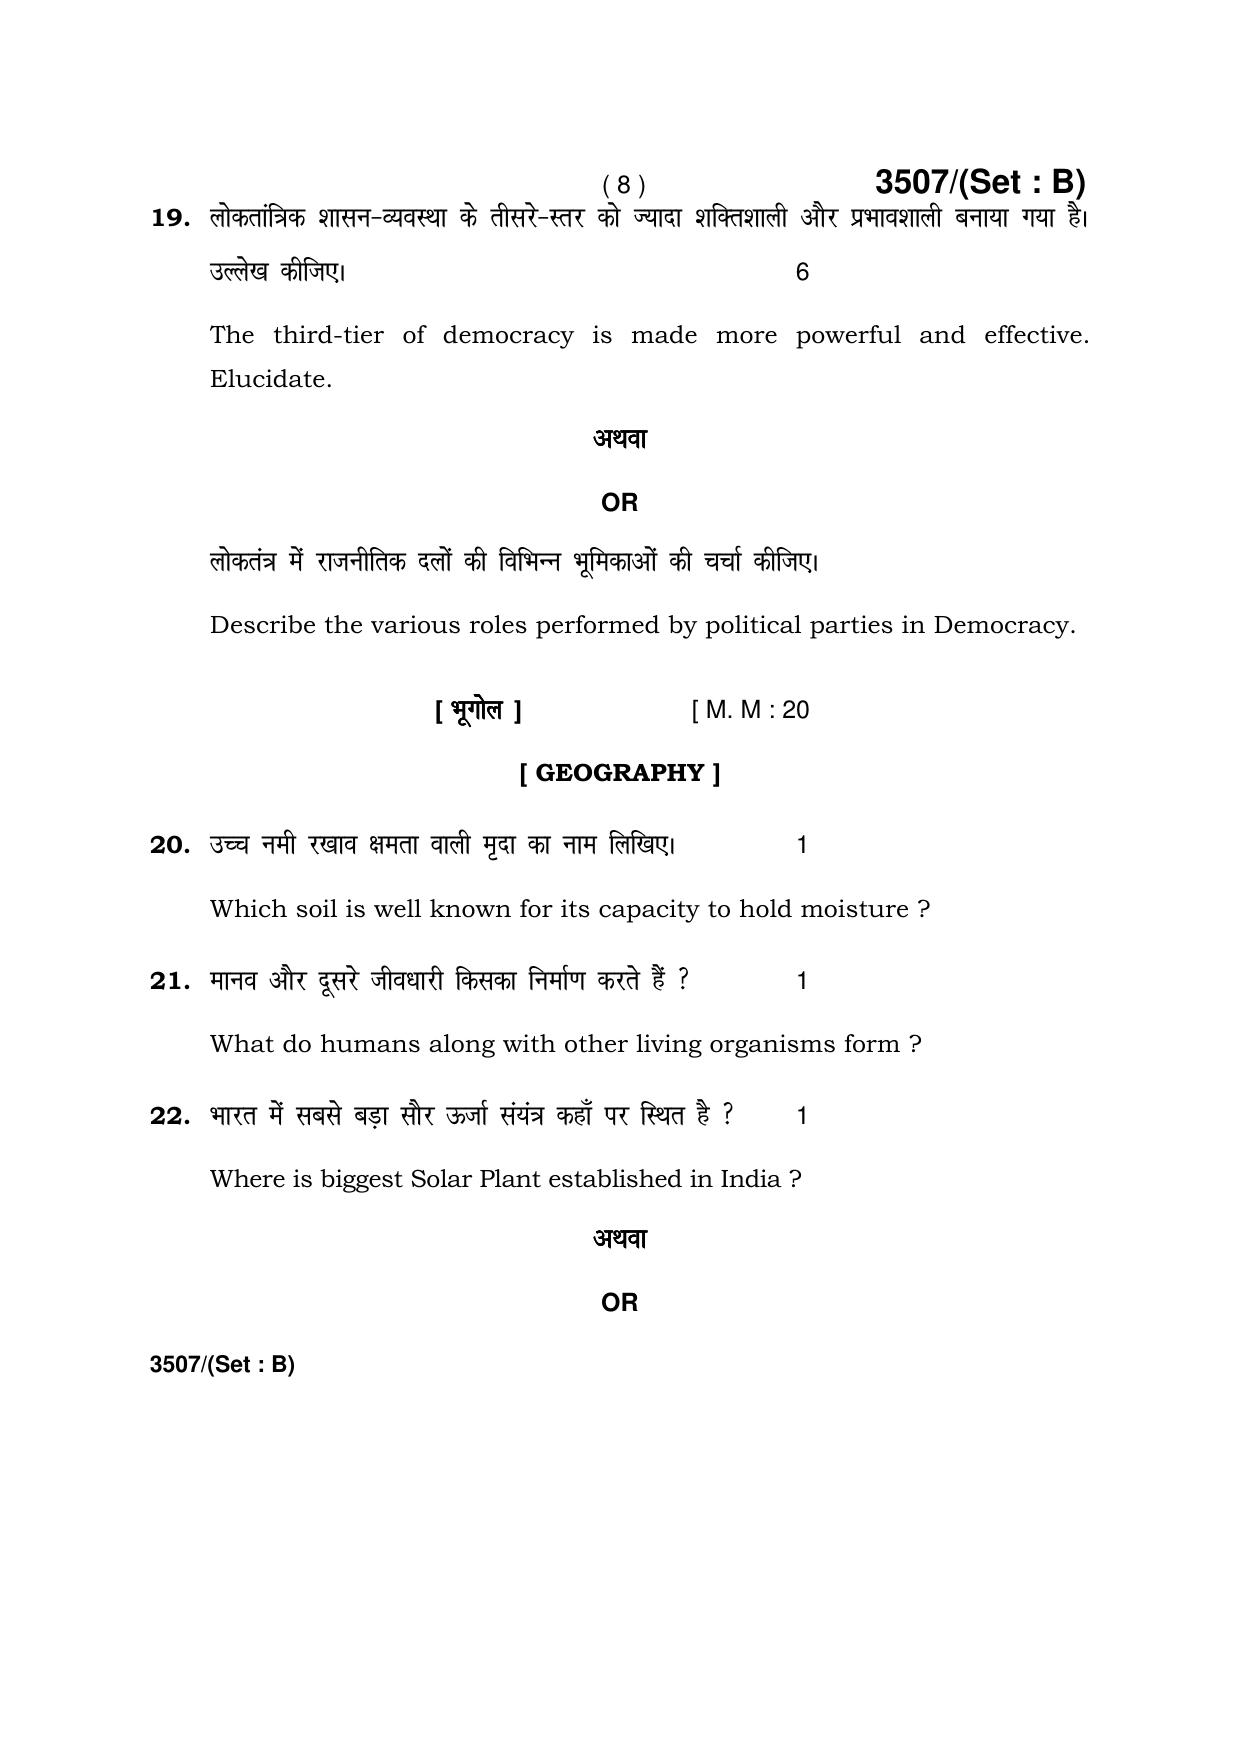 Haryana Board HBSE Class 10 Social Science -B 2018 Question Paper - Page 8